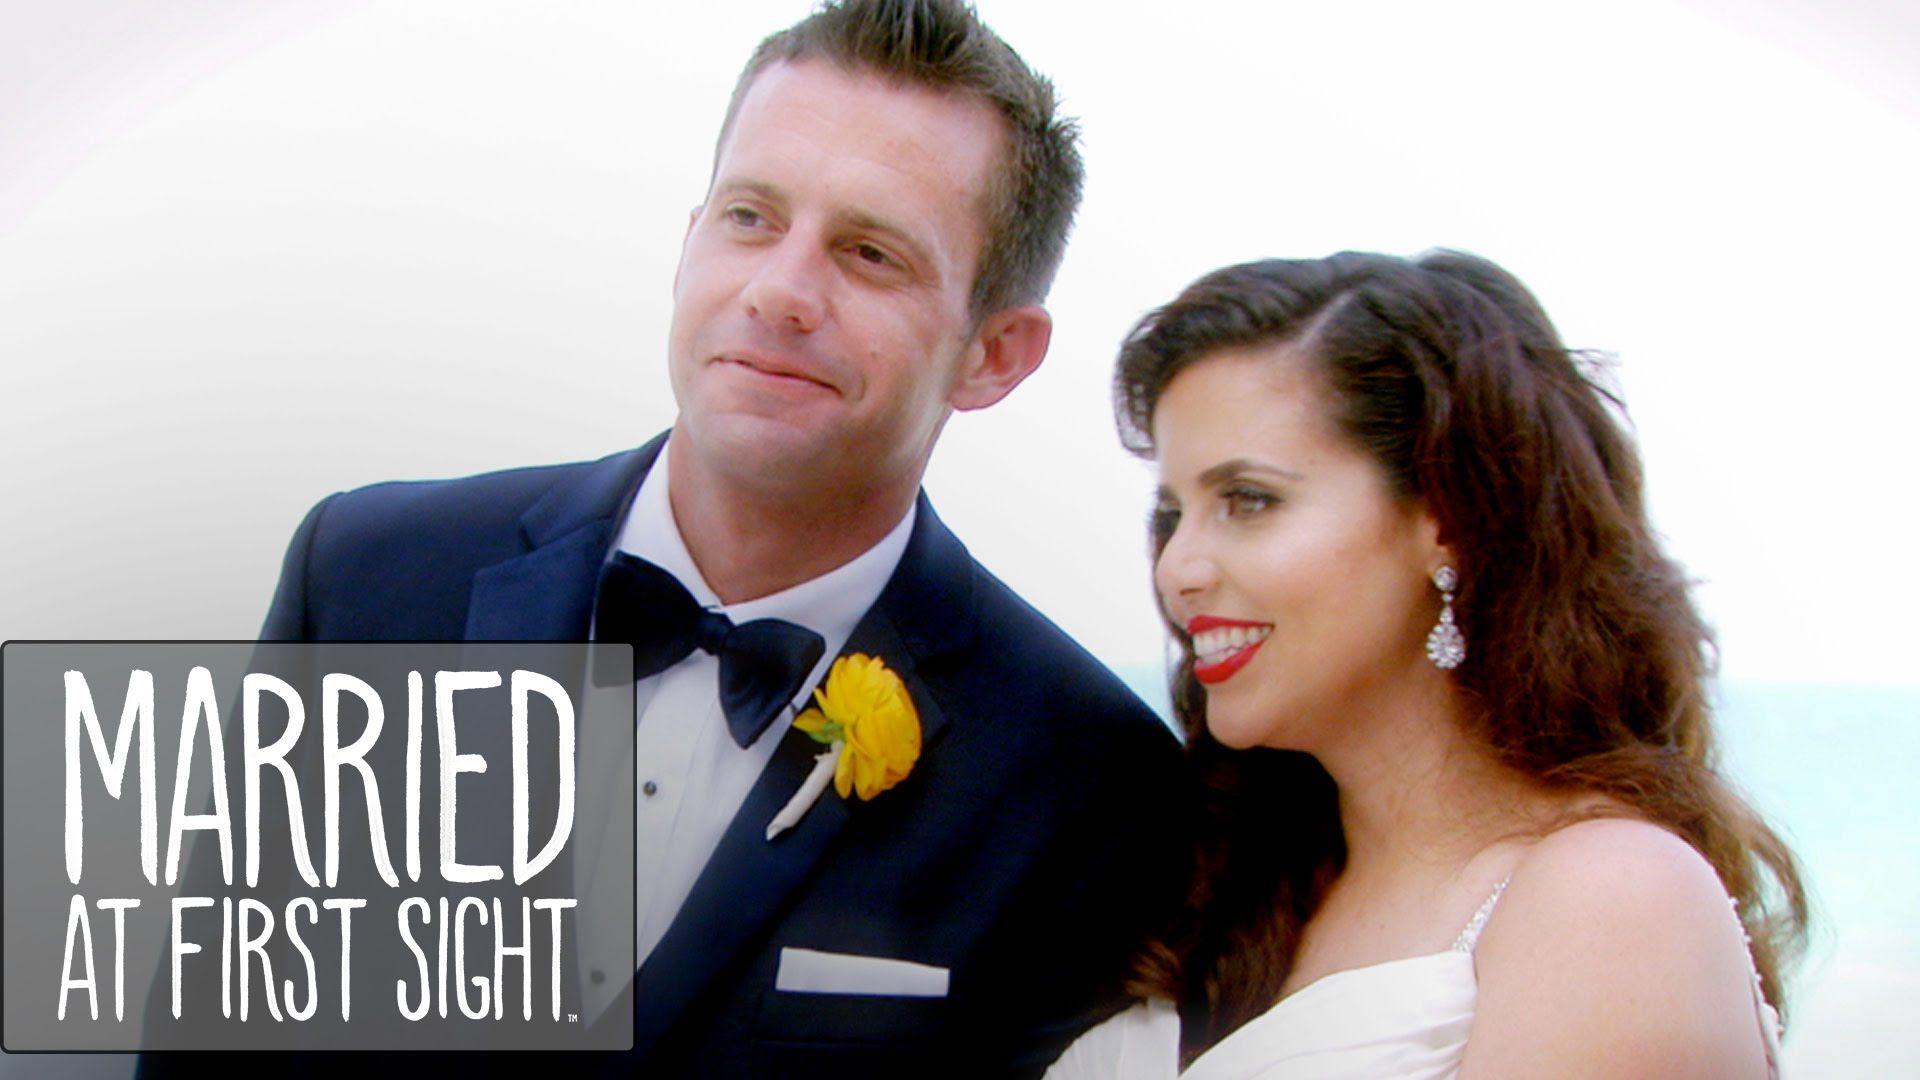 Married at First Sight: Unfiltered: The Weddings Season Episode